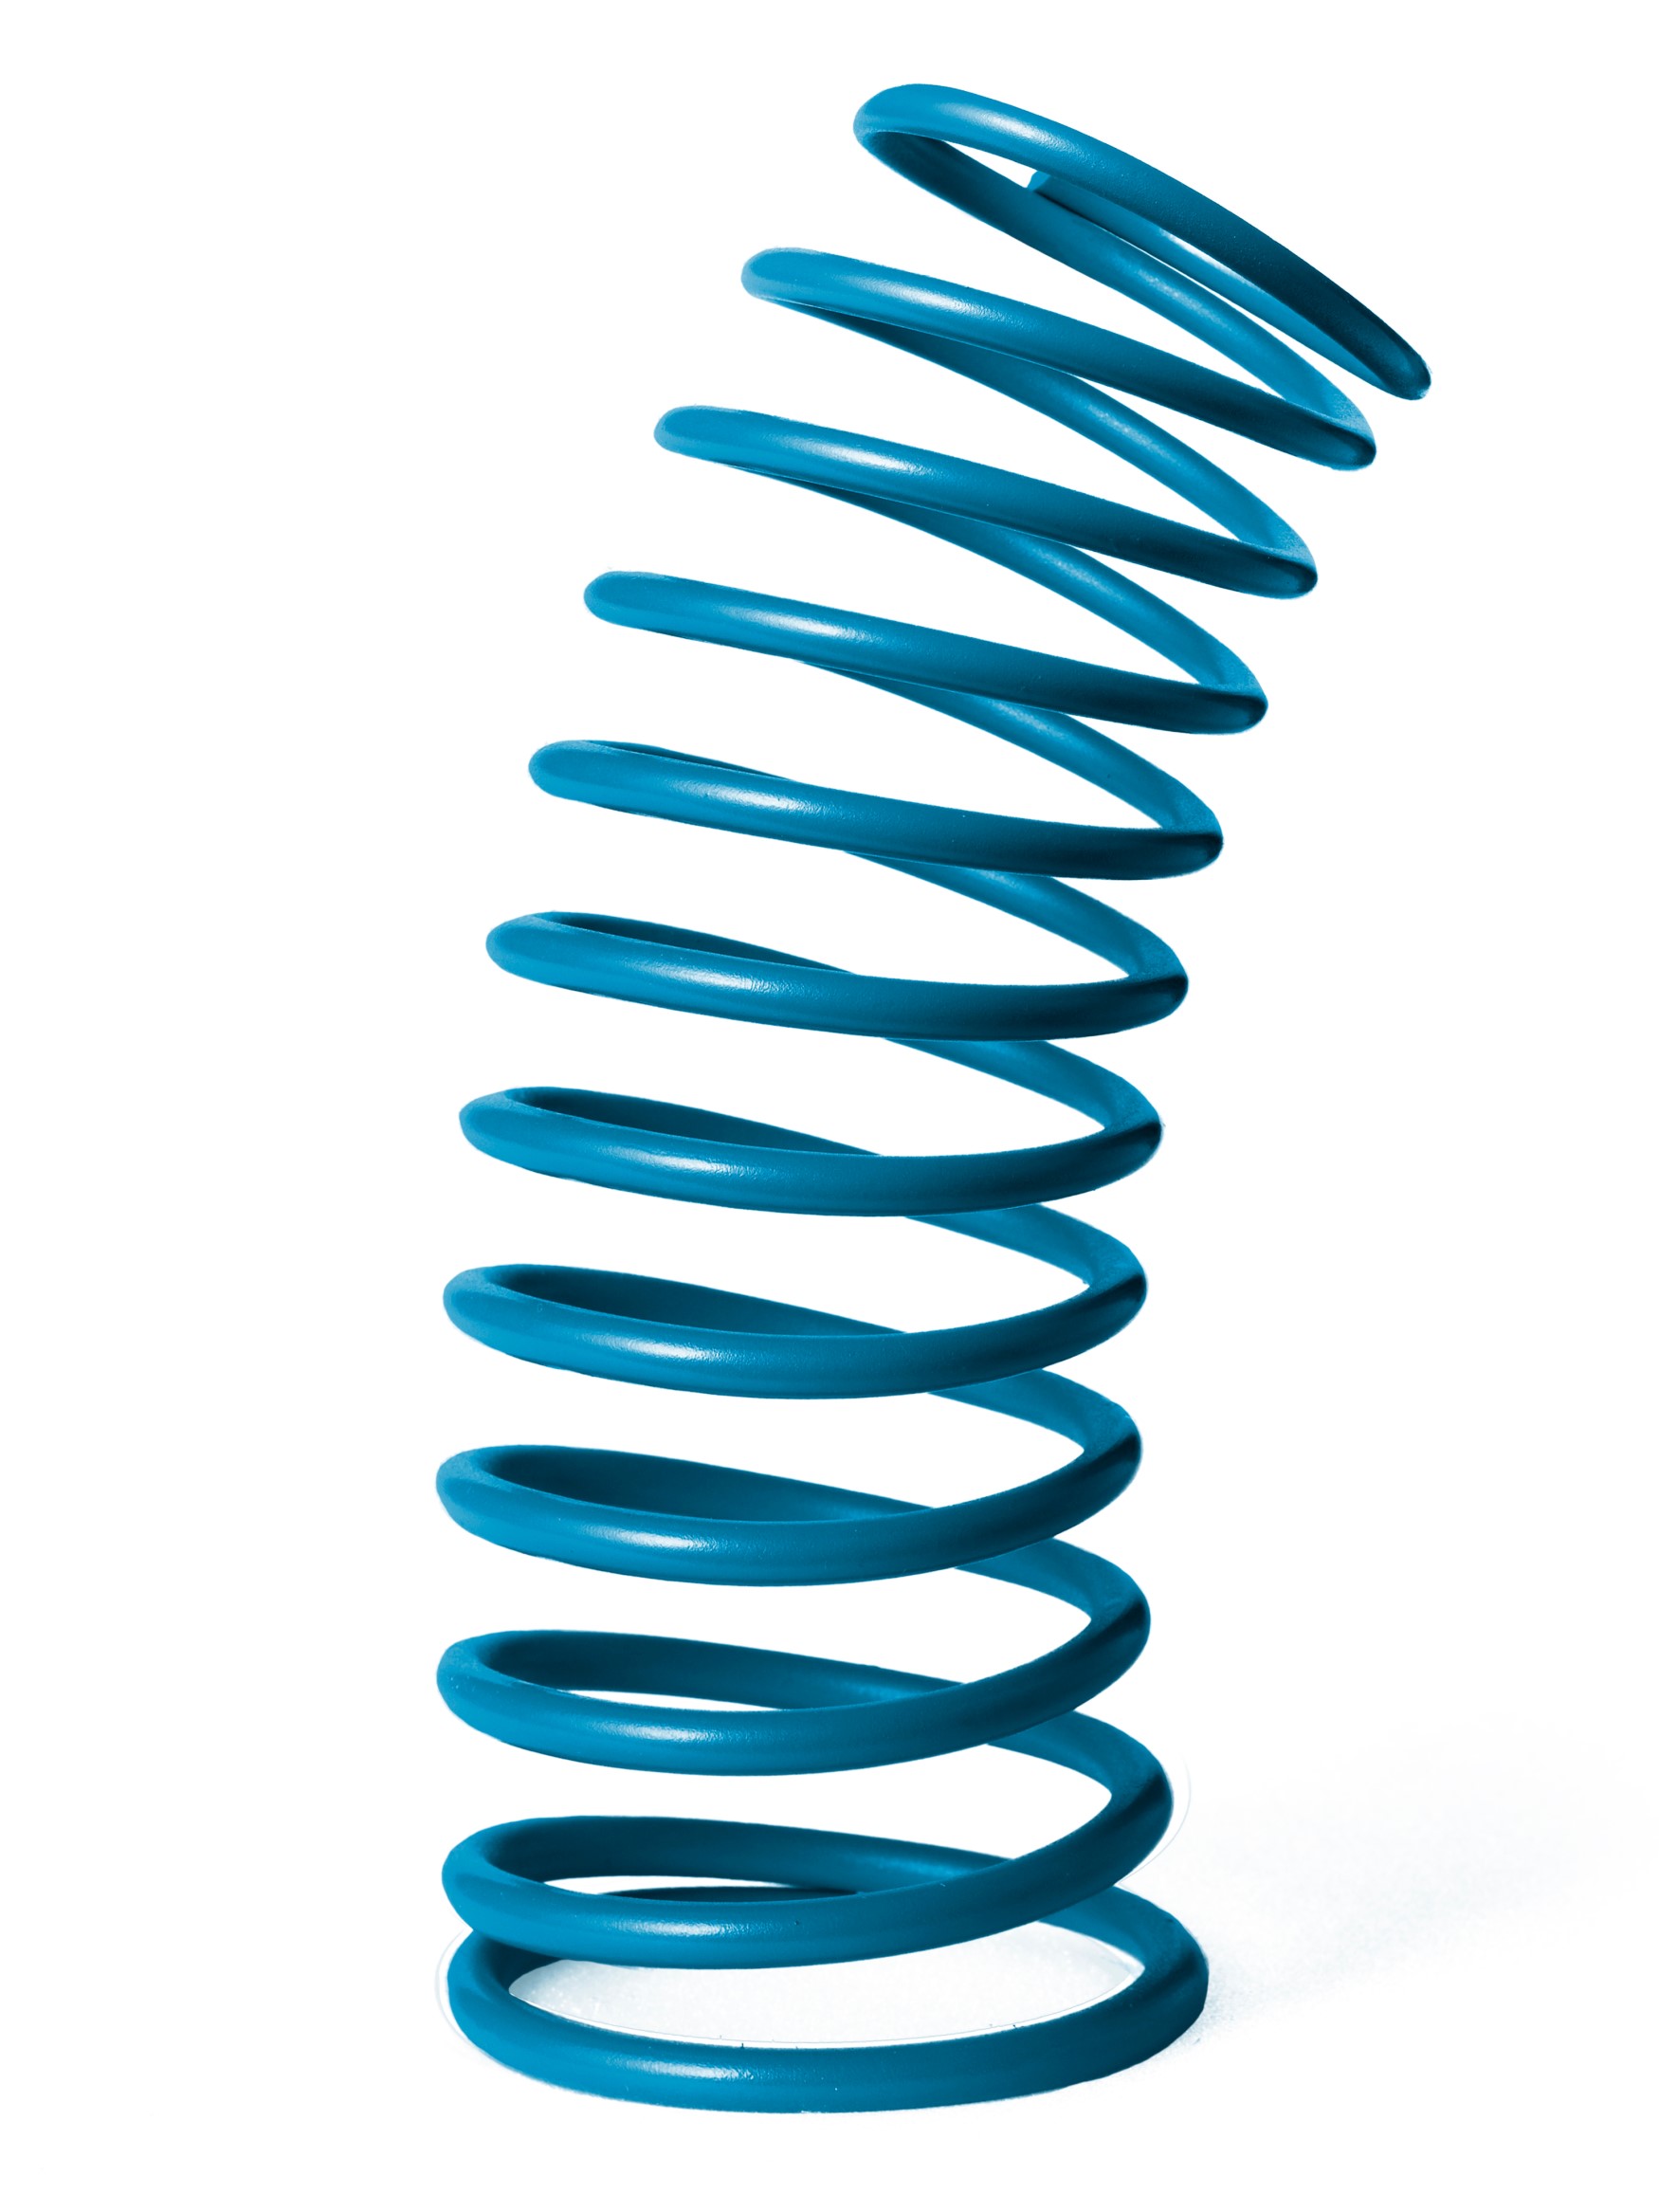 Coiled spring shutterstock 1068481448 small